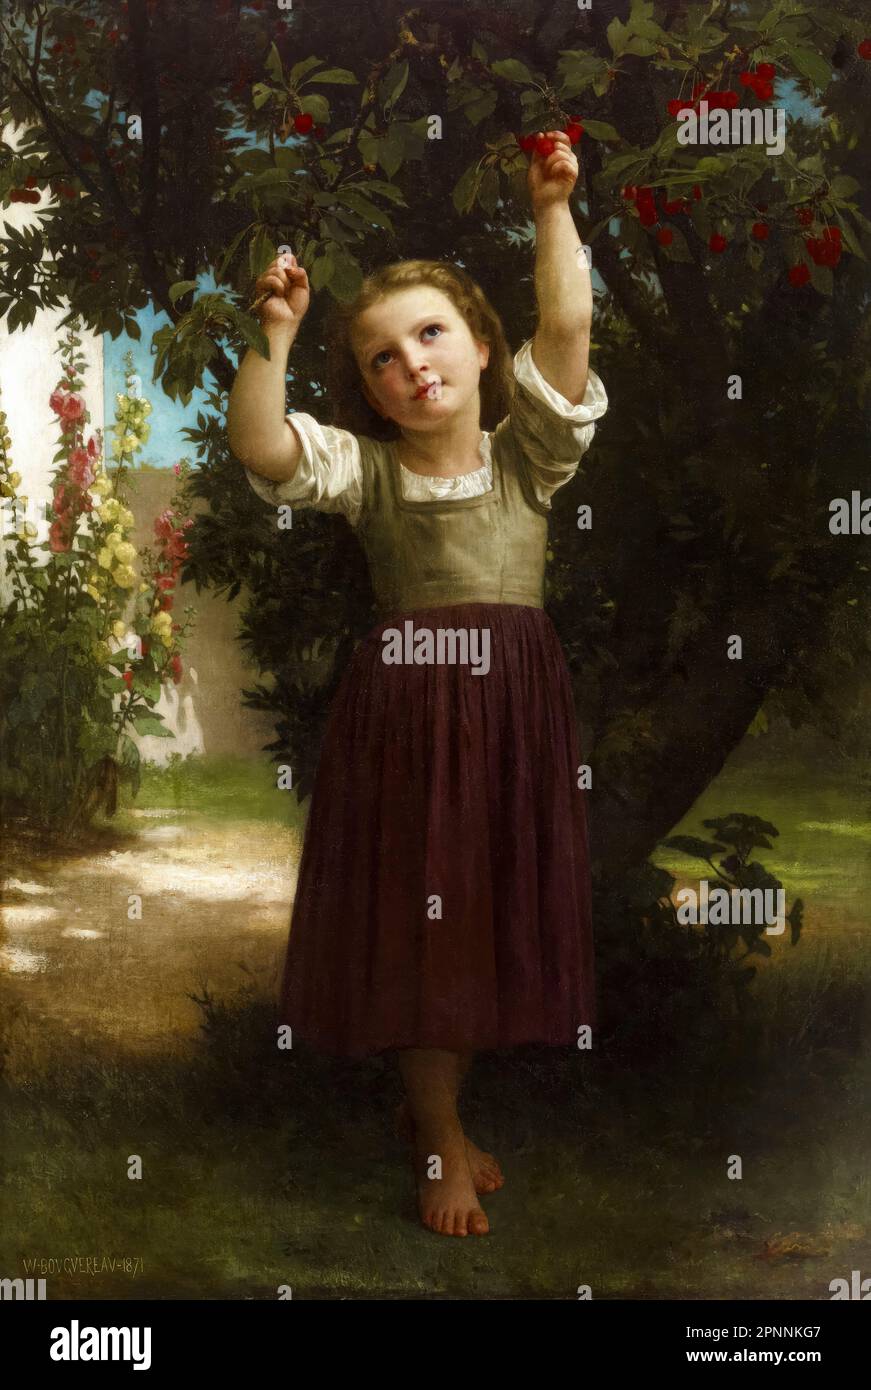 William Adolphe Bouguereau, The Cherry Picker, painting in oil on canvas, 1871 Stock Photo